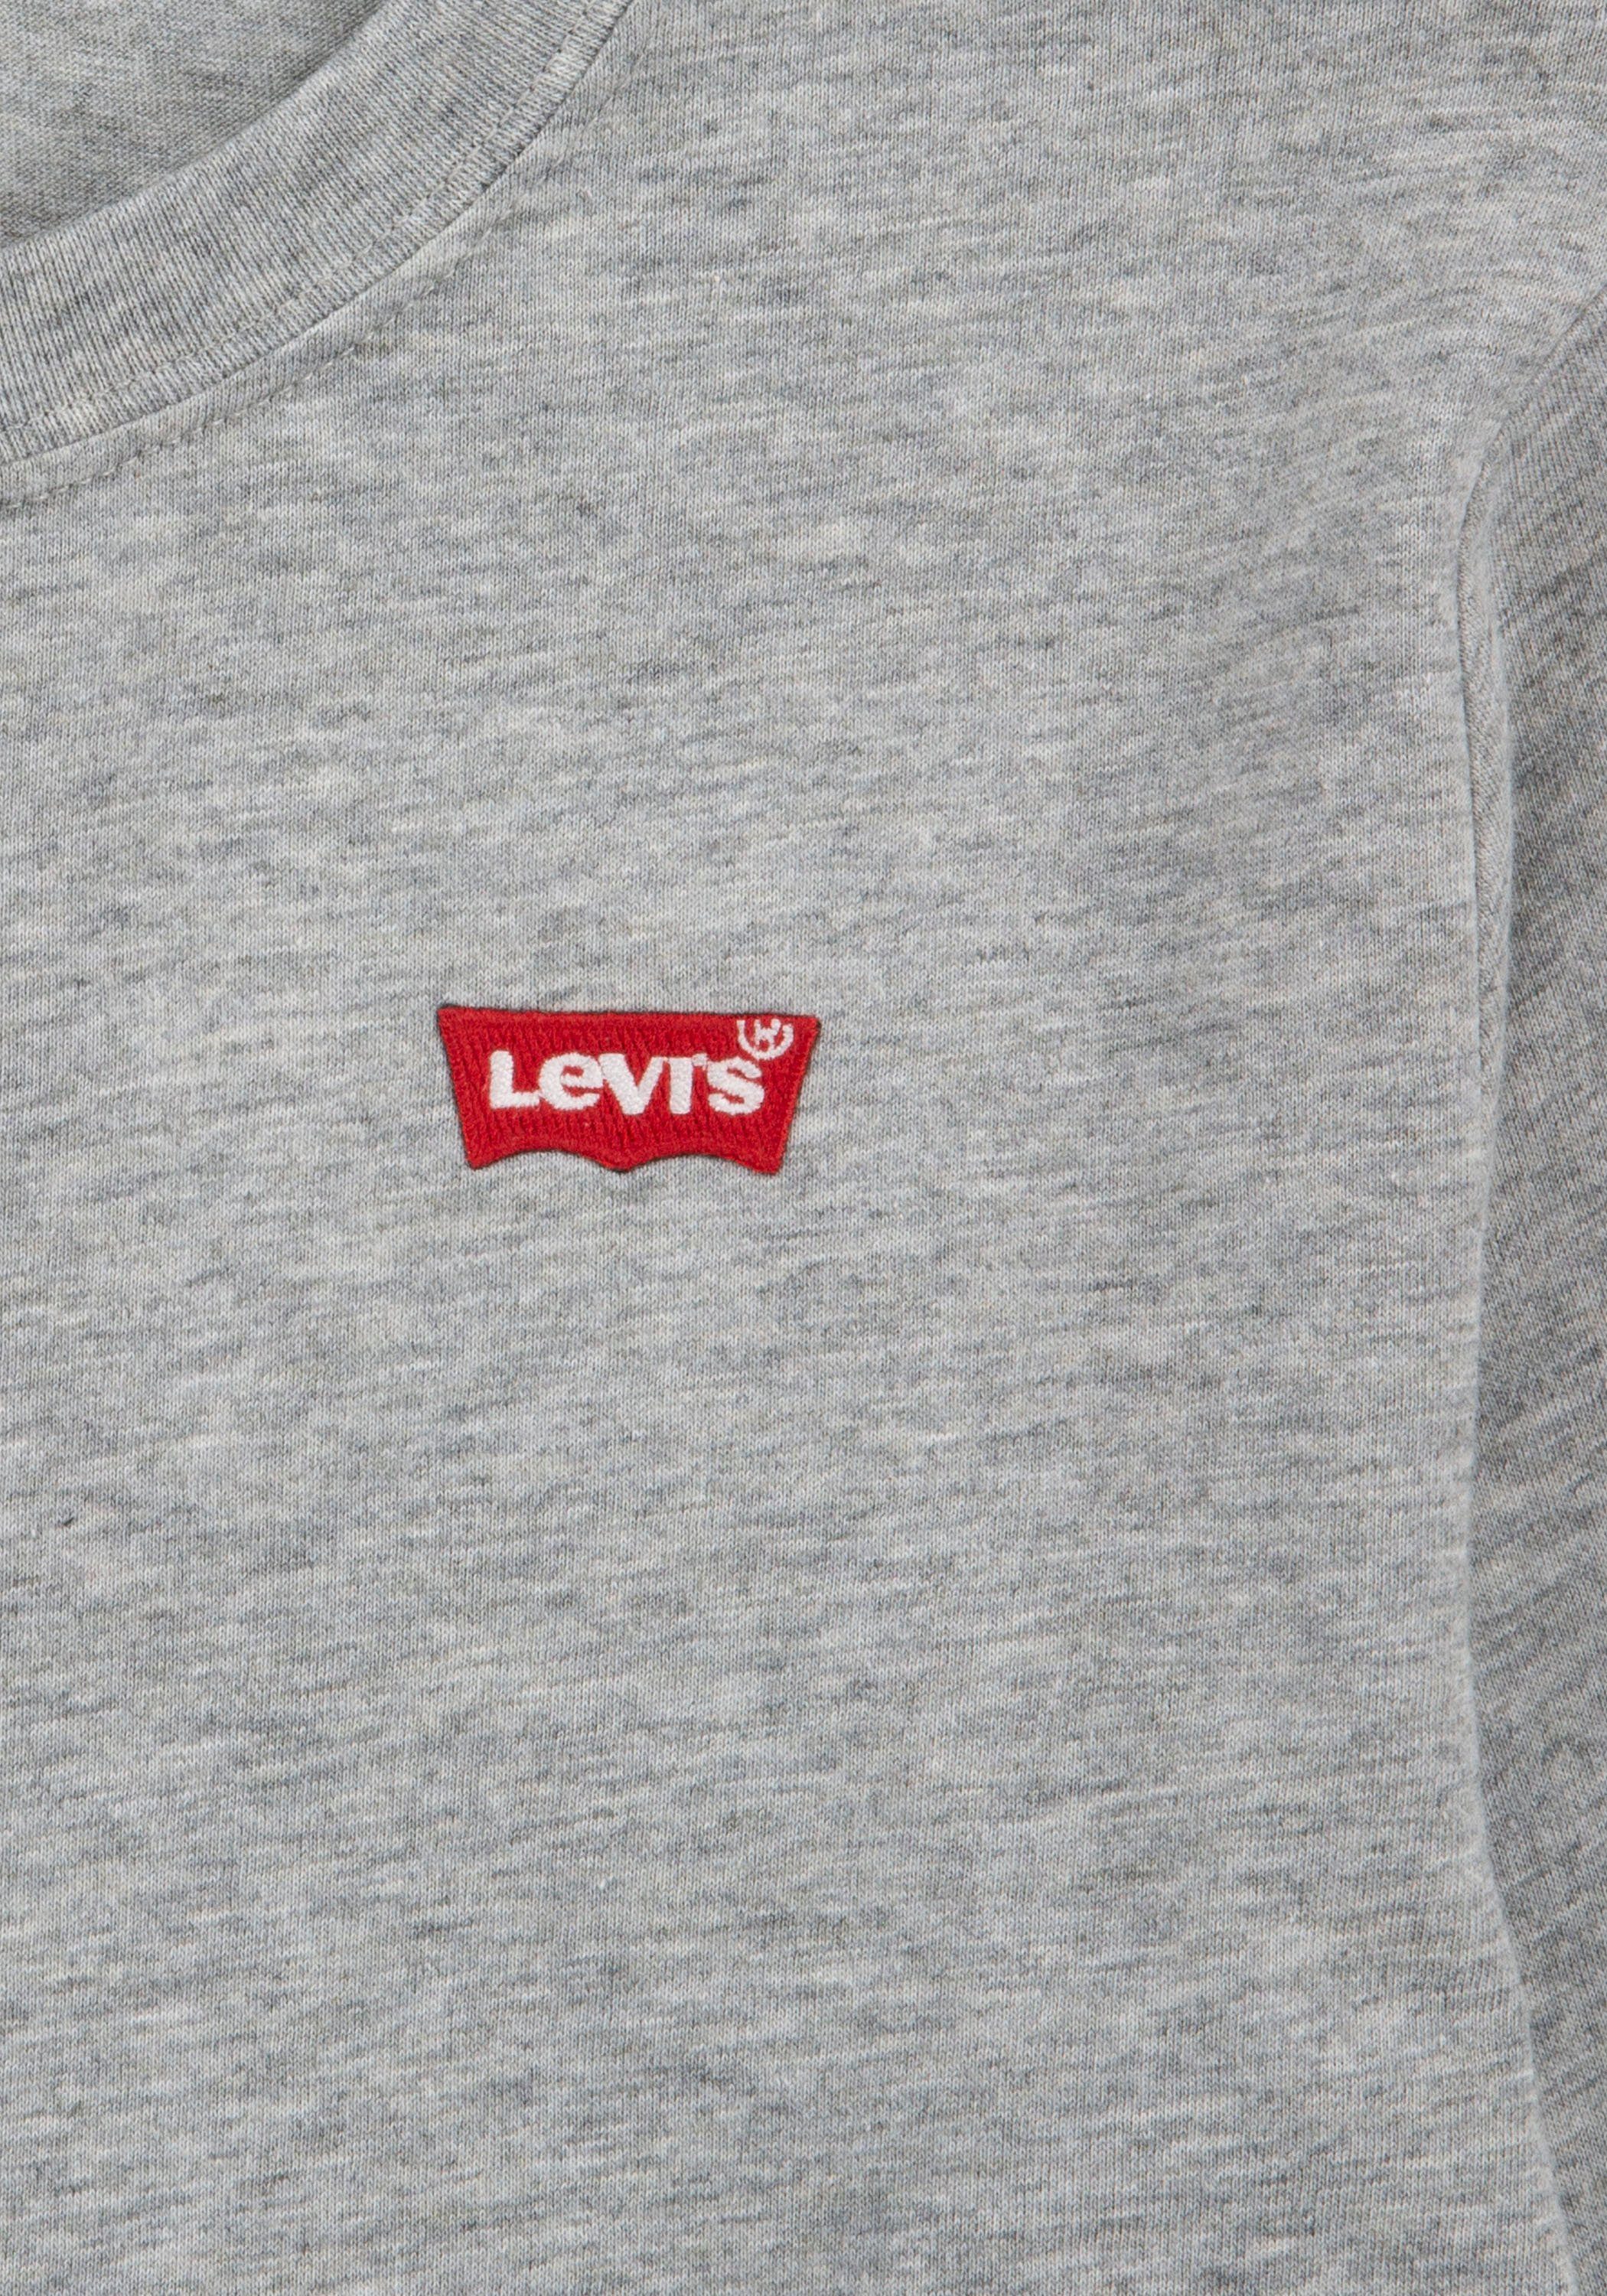 Langarmshirt Levi's® L/S for grey BOYS Kids heather CHESTHIT BATWING TEE